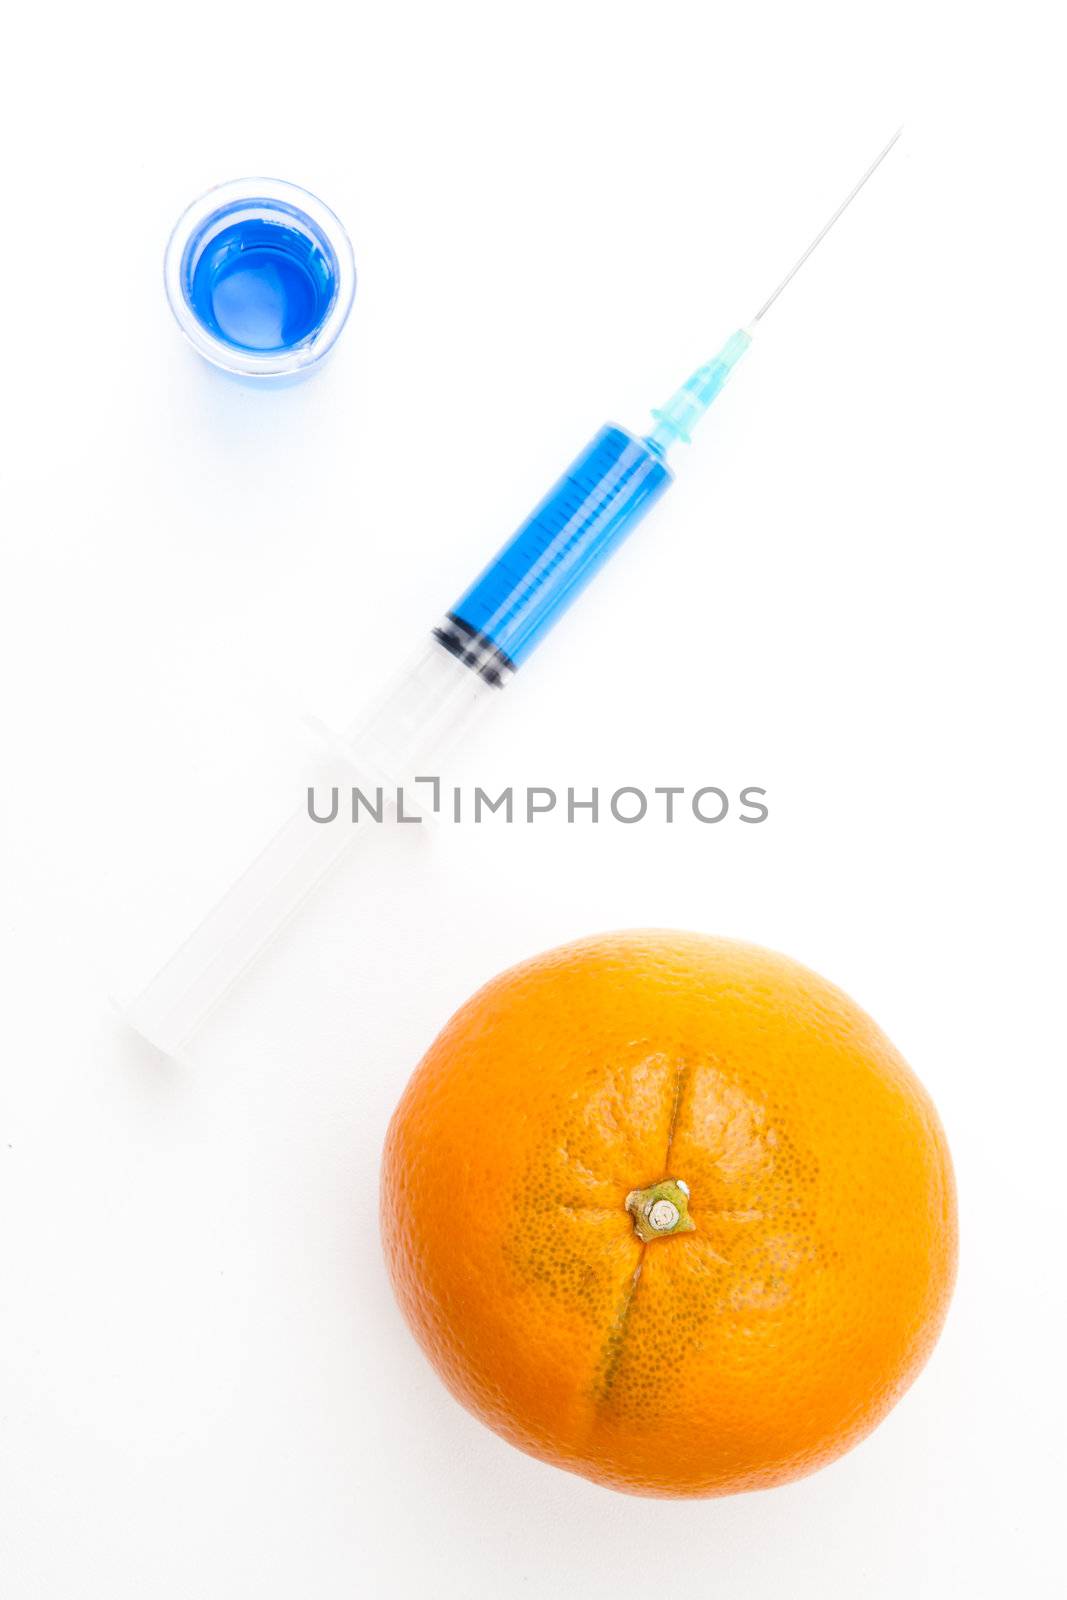  Syringe between a beaker and an orange against a white background